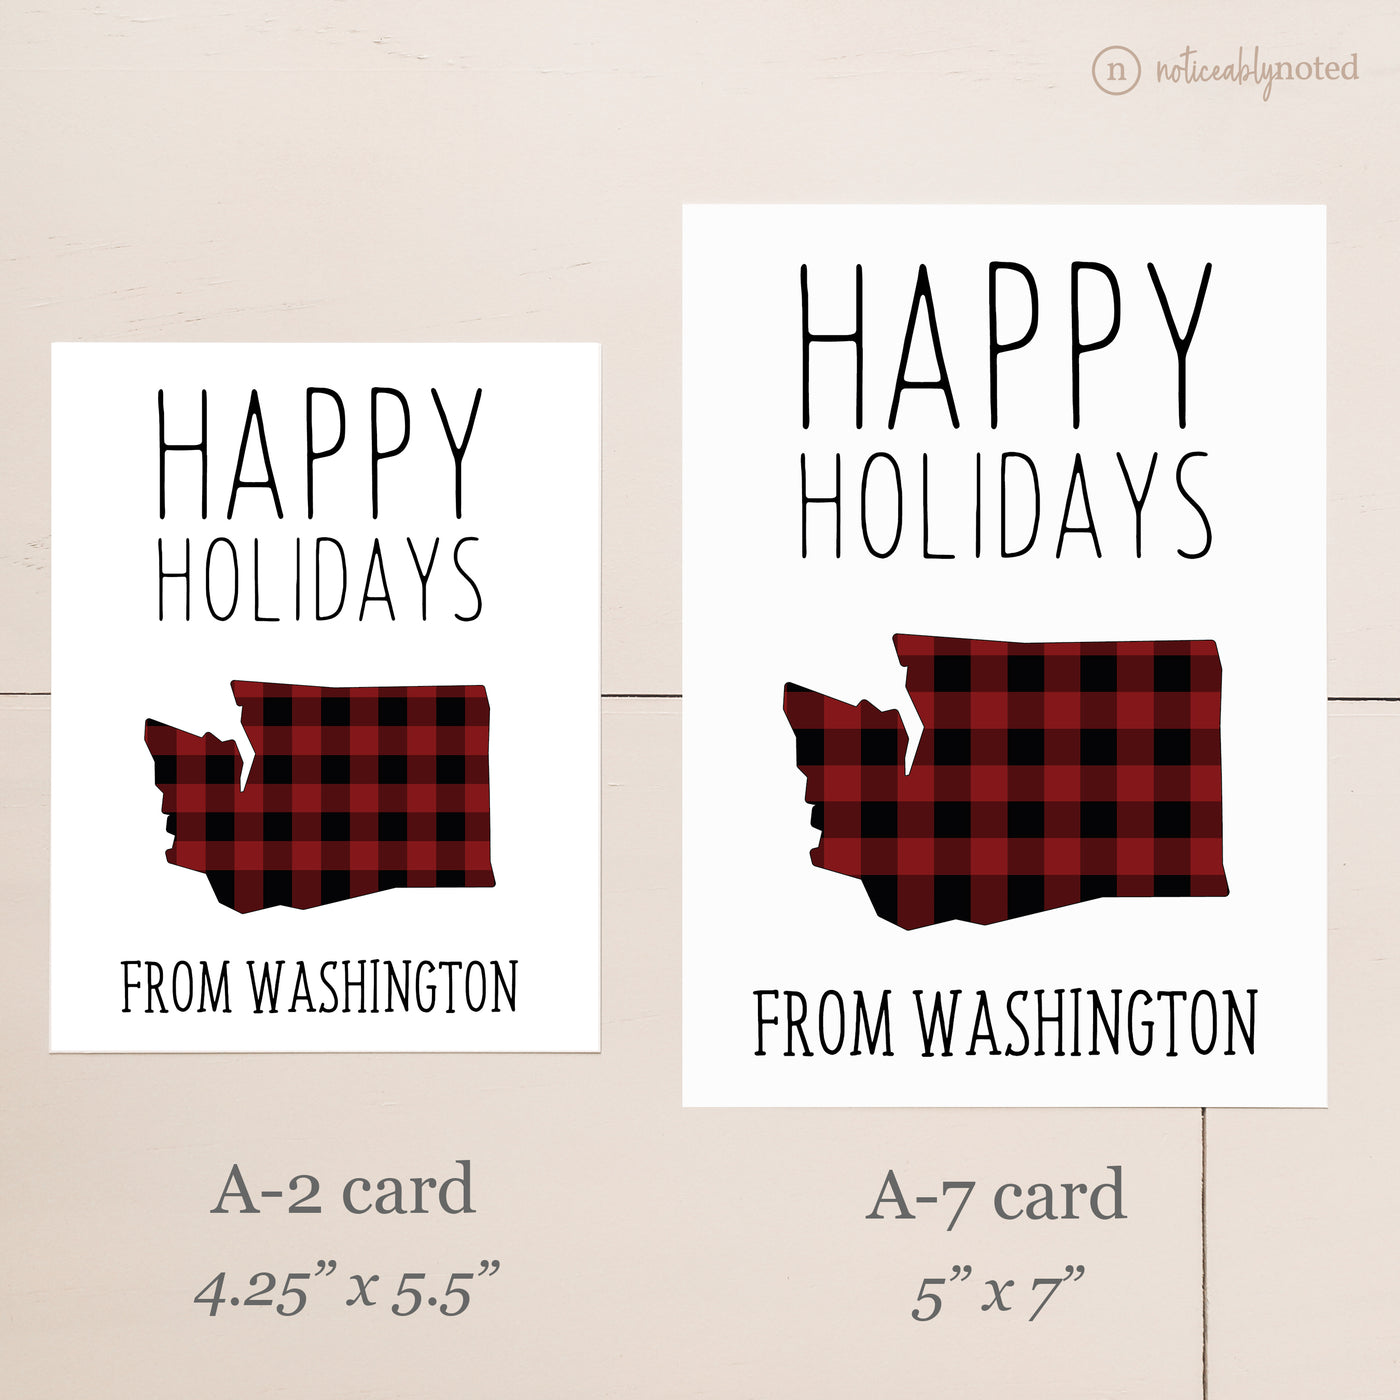 Washington Holiday Card - Size Comparison | Noticeably Noted